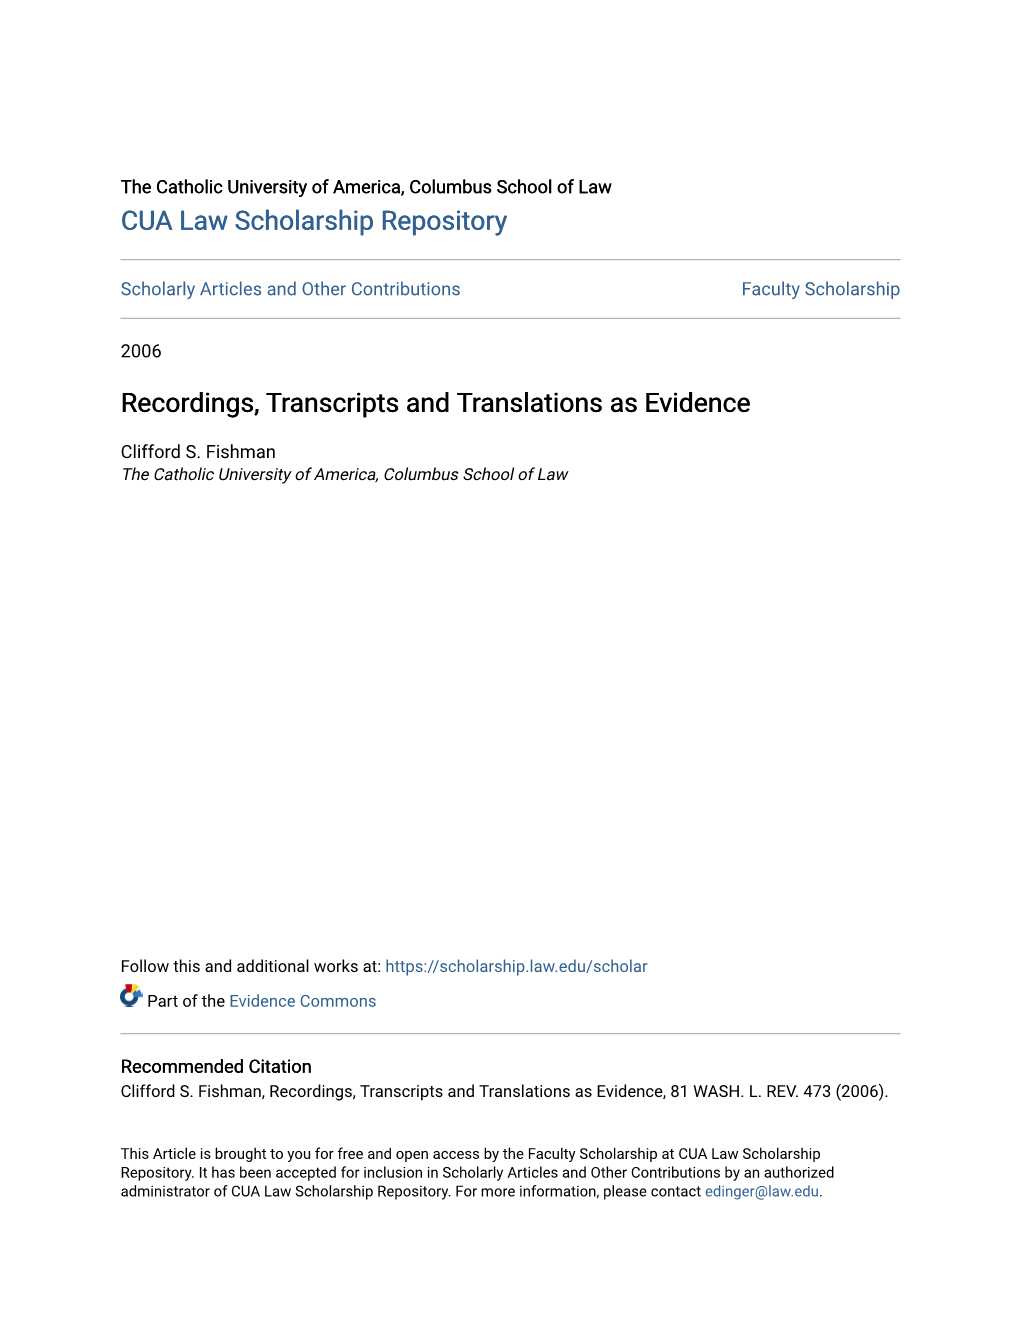 Recordings, Transcripts and Translations As Evidence